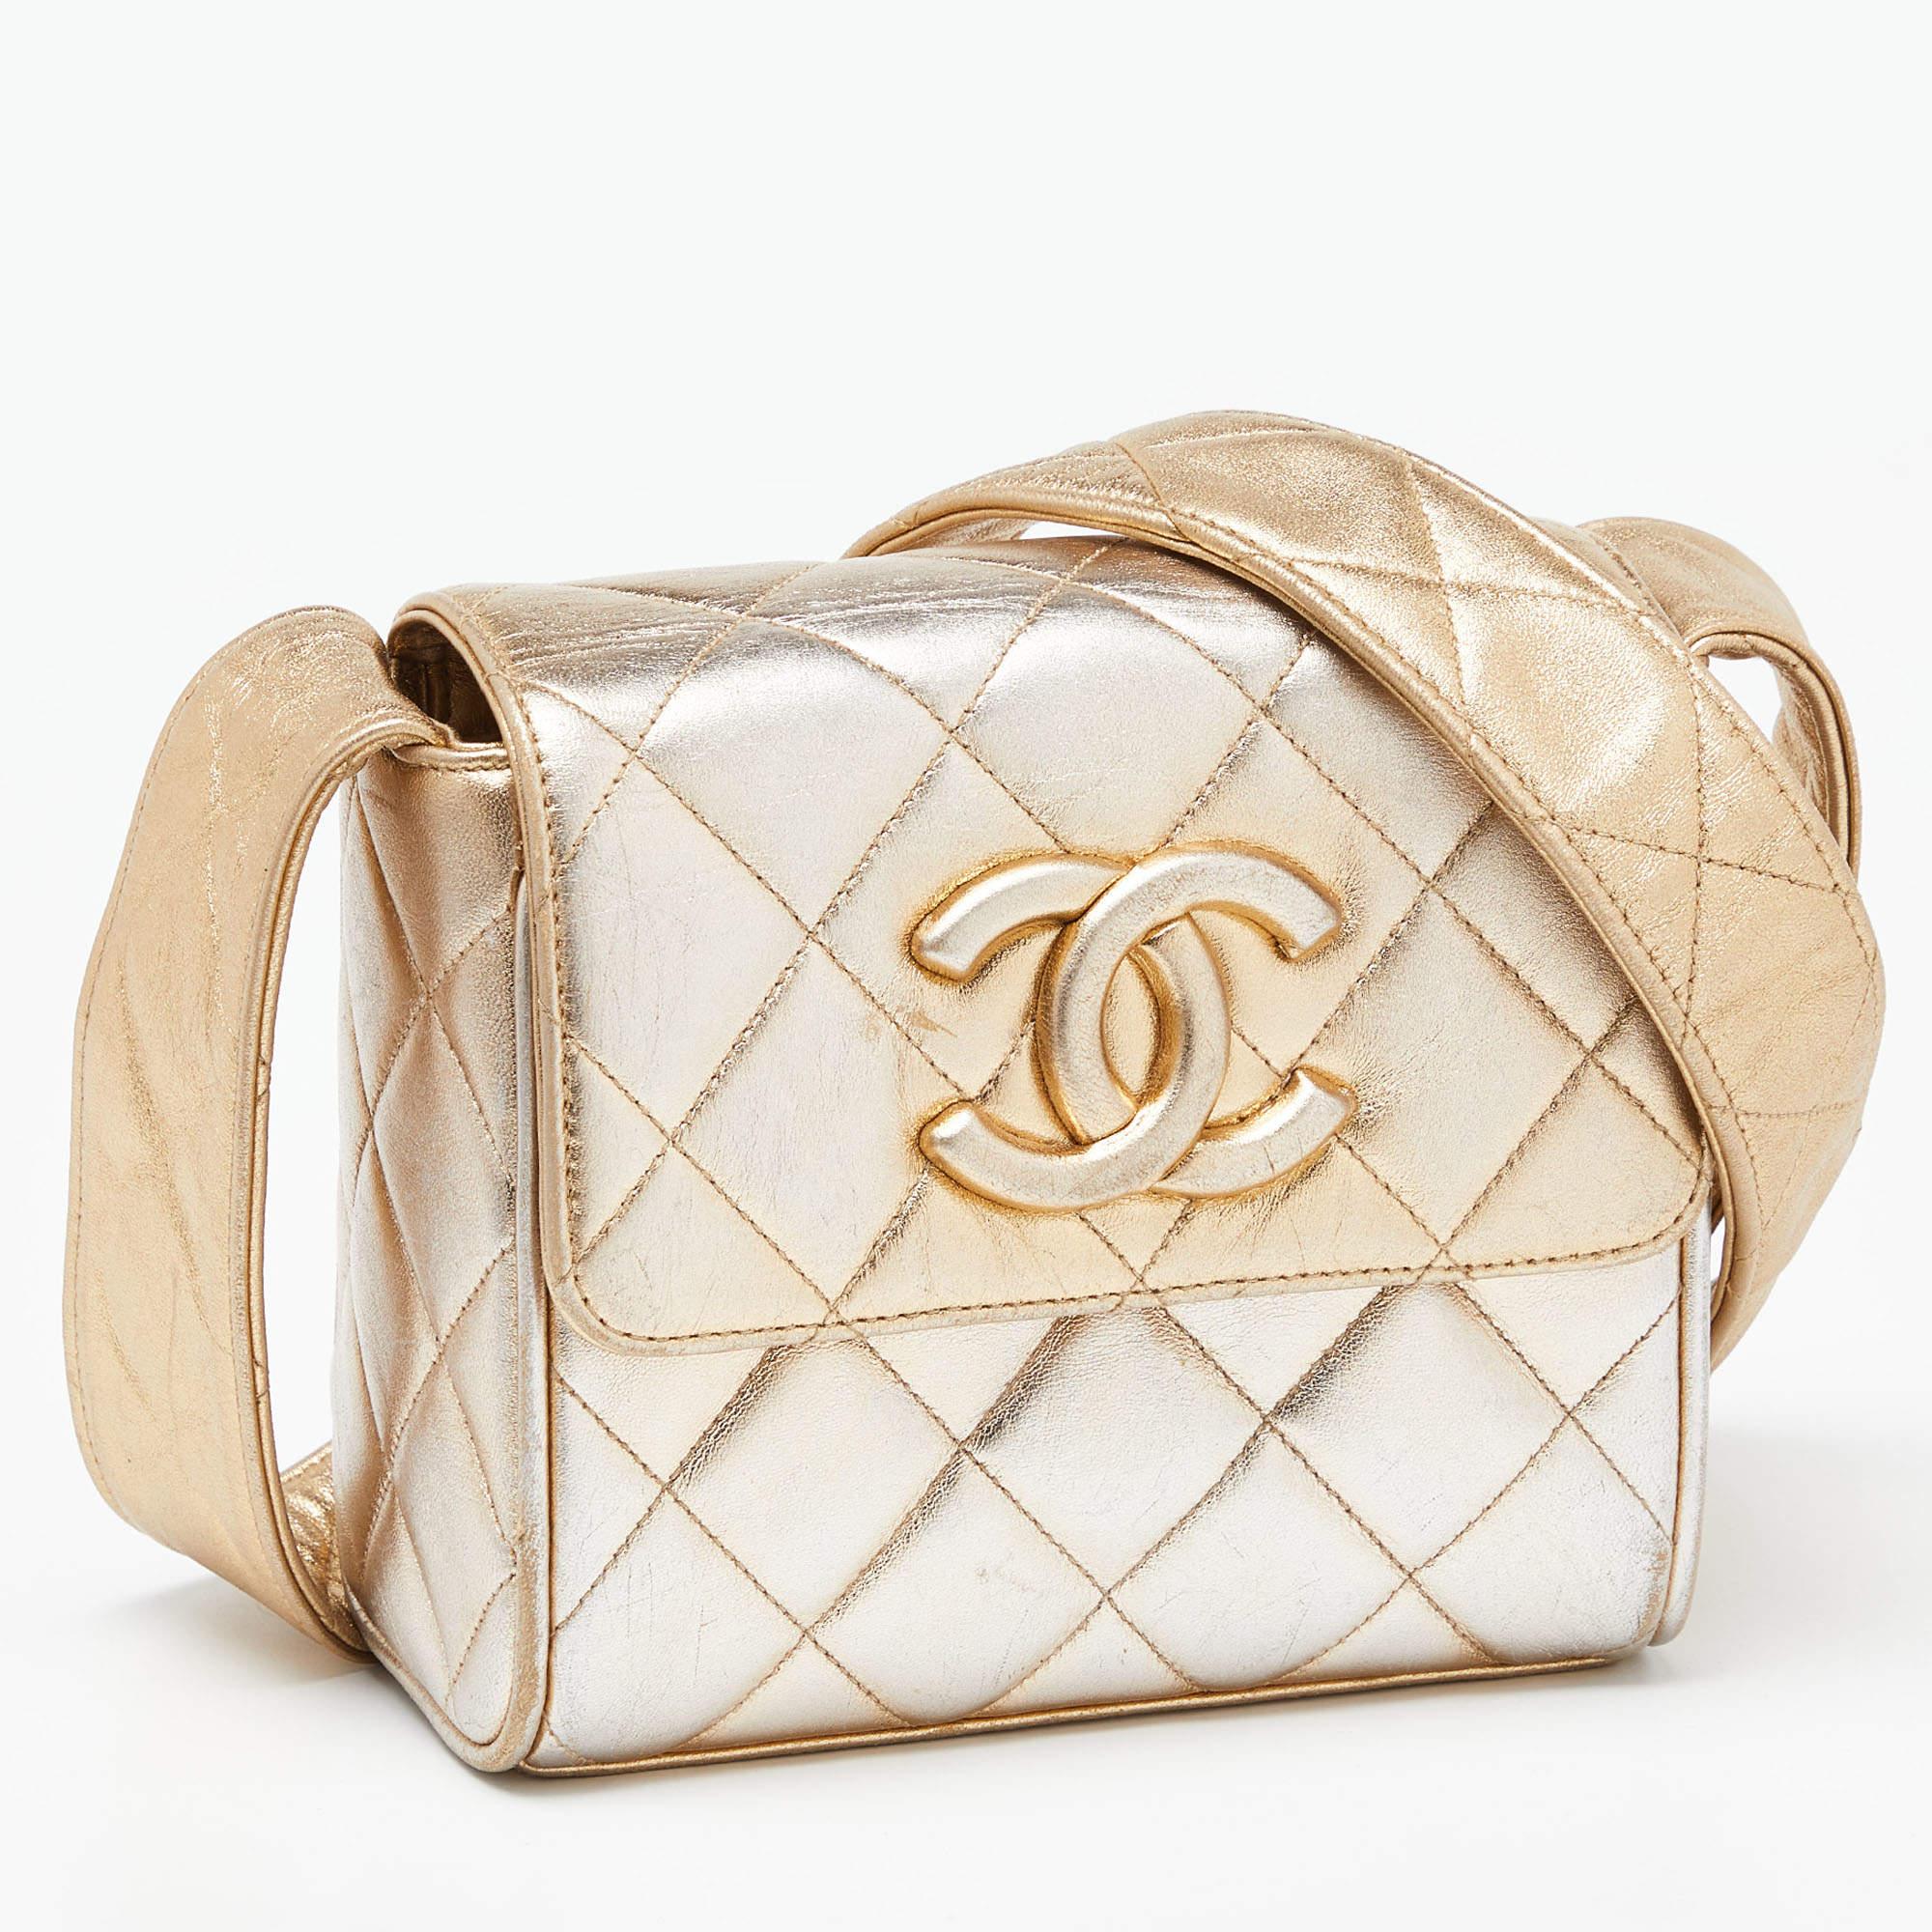 This Chanel gold CC flap bag is an example of the brand's fine designs that are skillfully crafted to project a classic charm. It is a functional creation with an elevating appeal.

